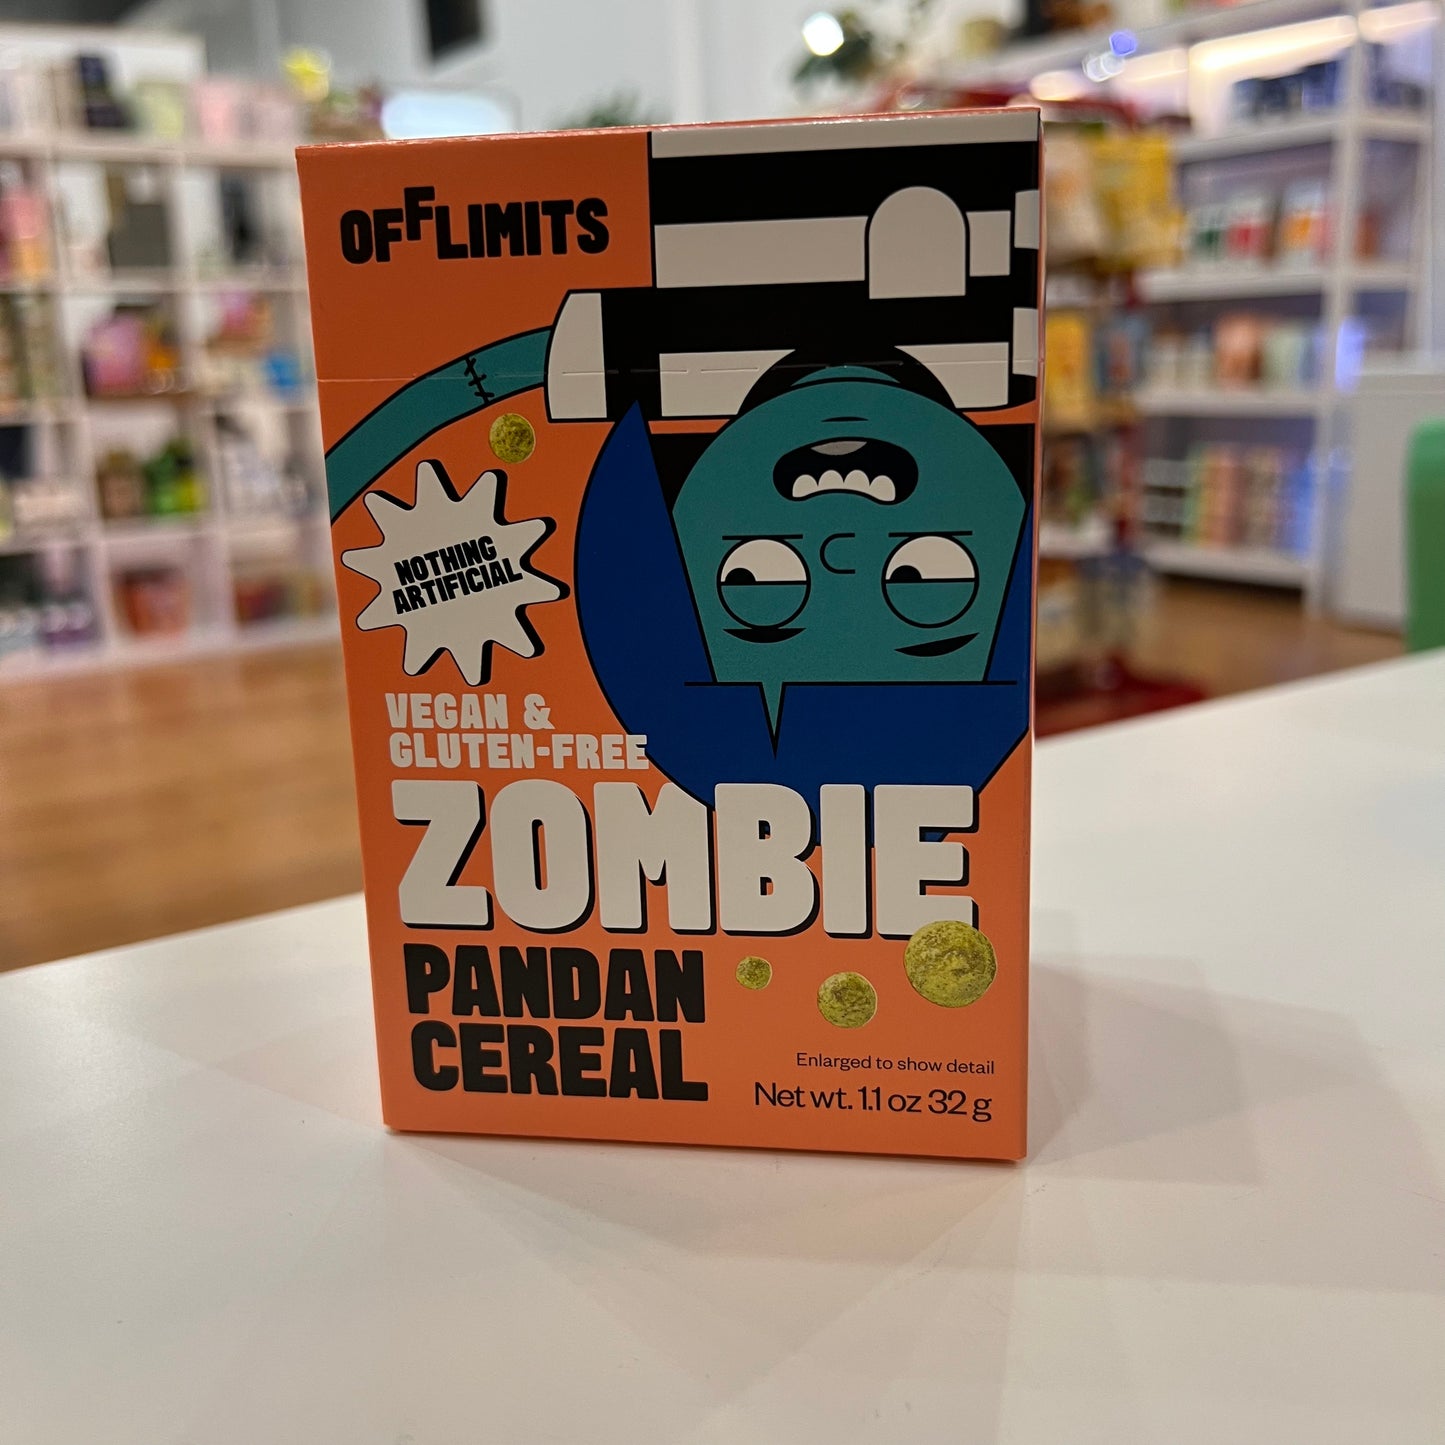 Off limits - Zombie Pandan Cereal